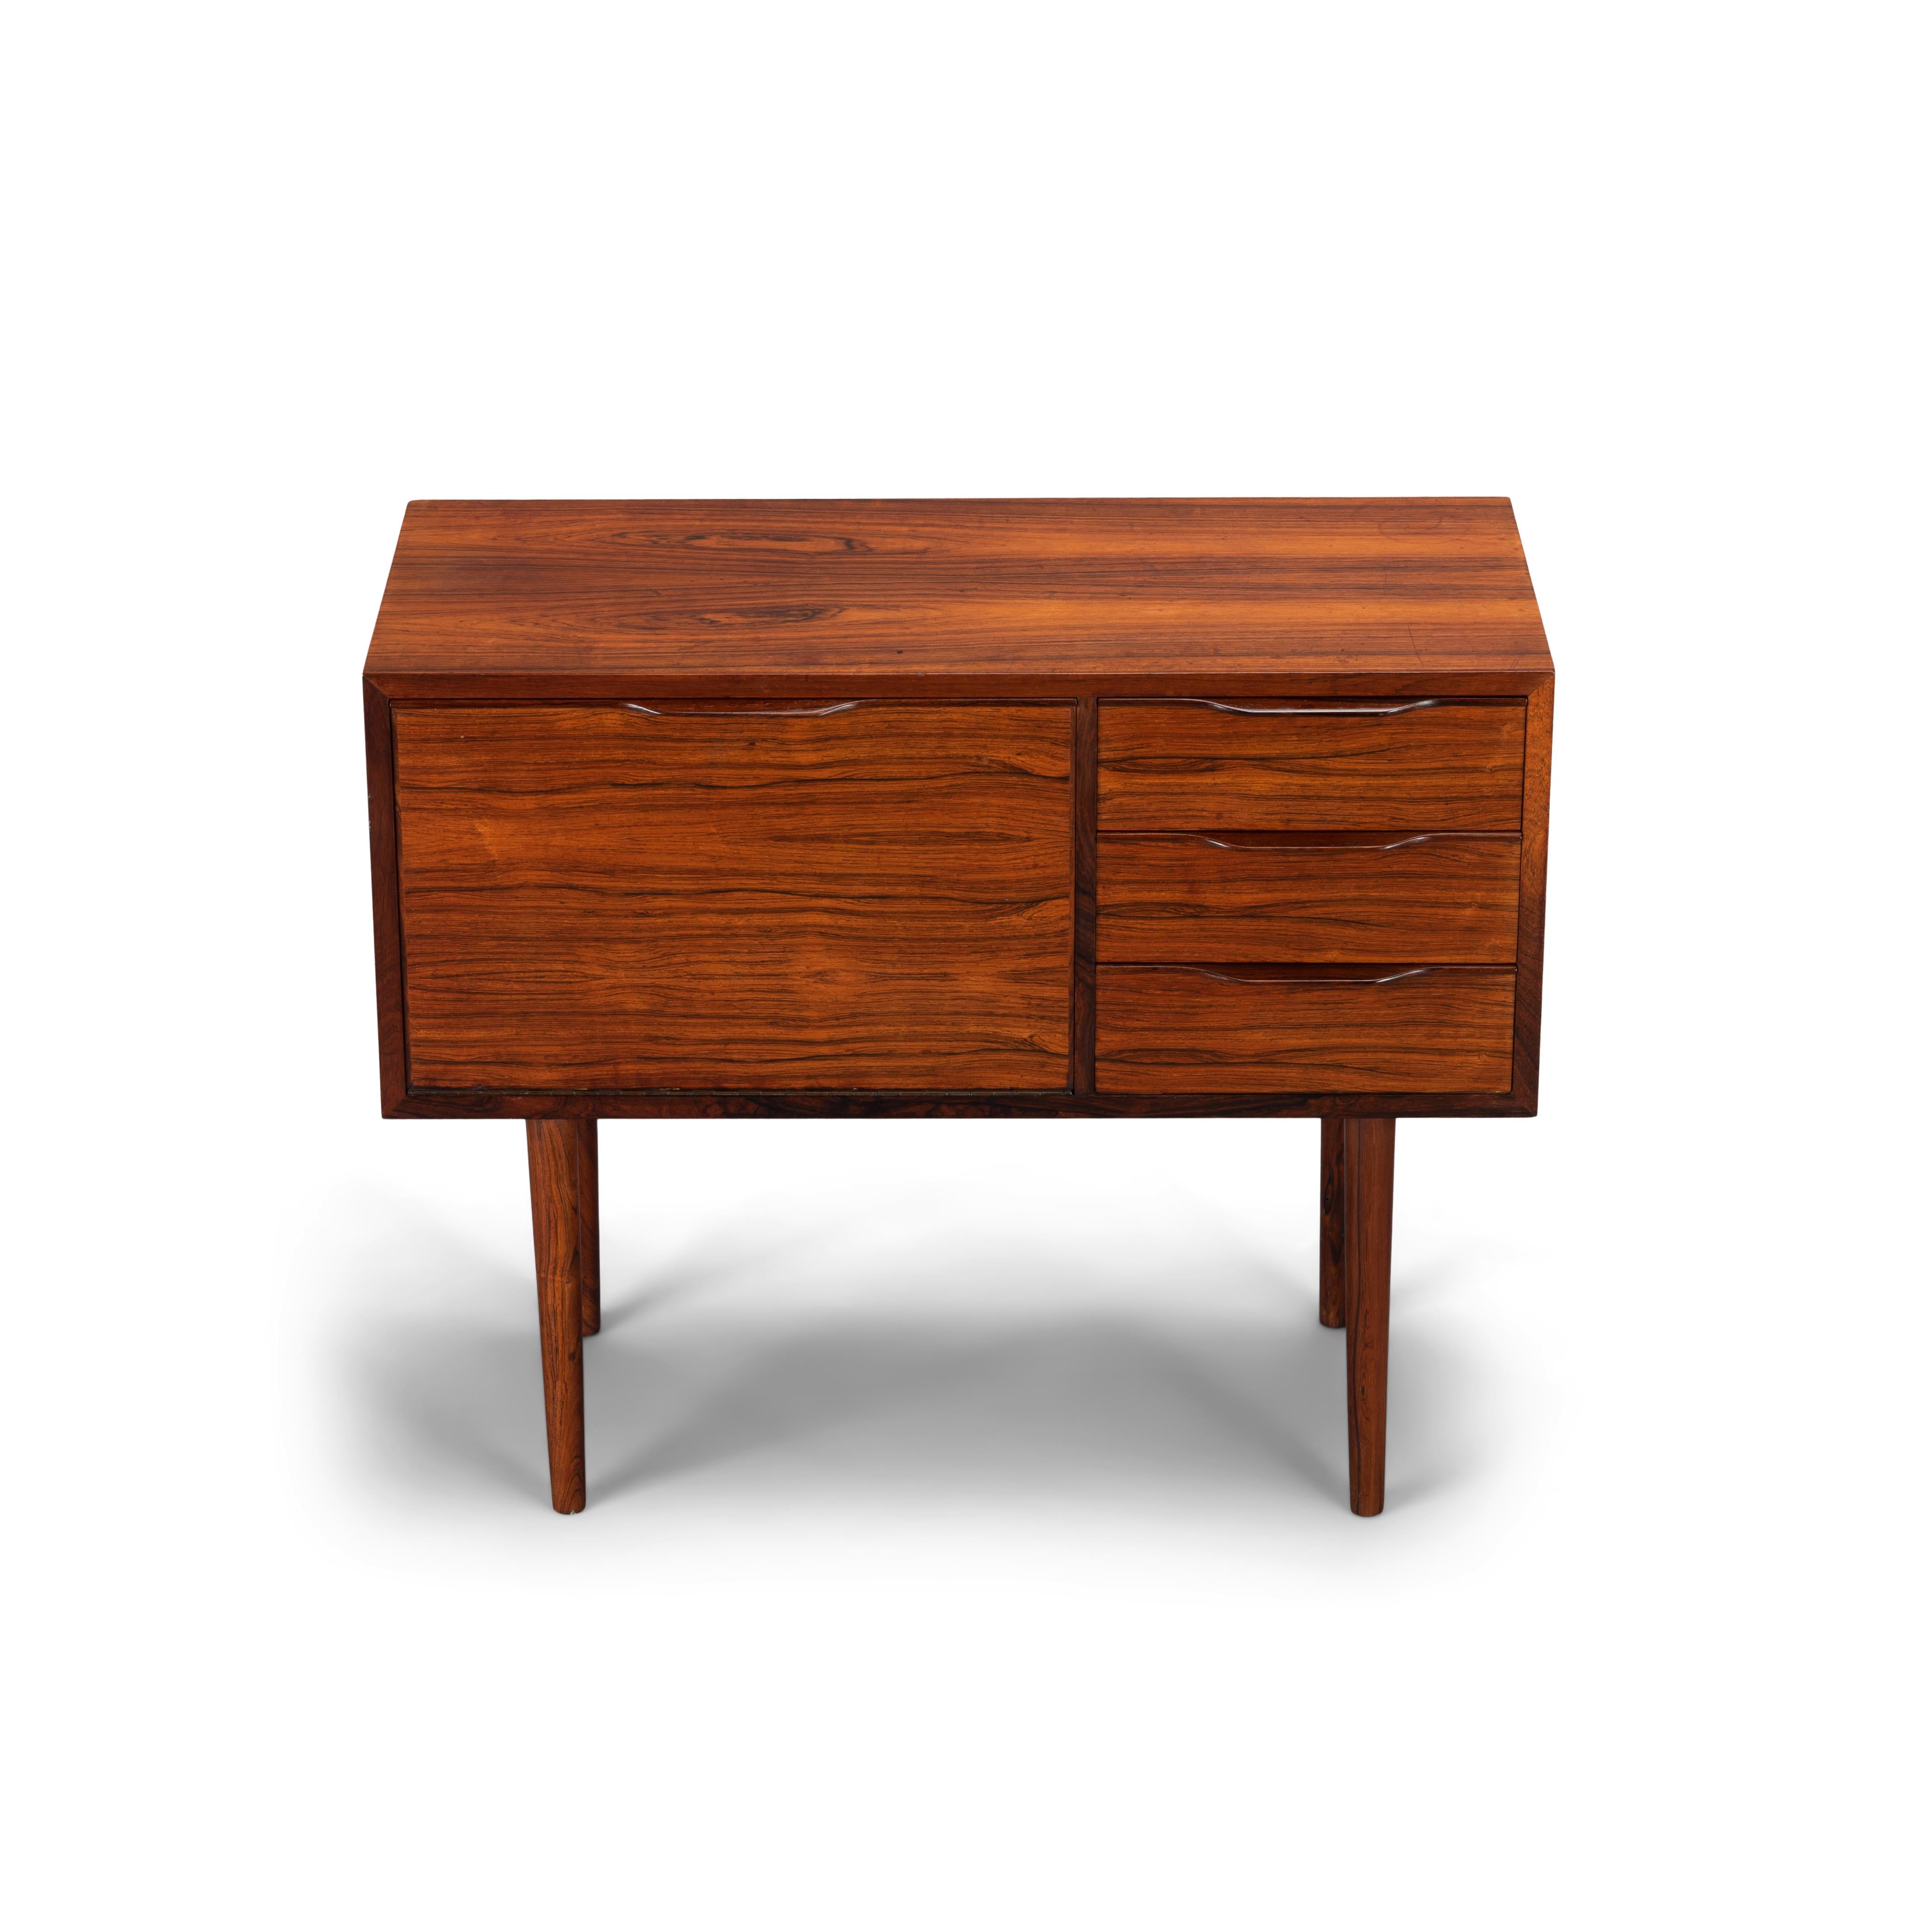 Mid-20th Century Danish Mid-Century Modern Small Chest with Drawers, 1960s